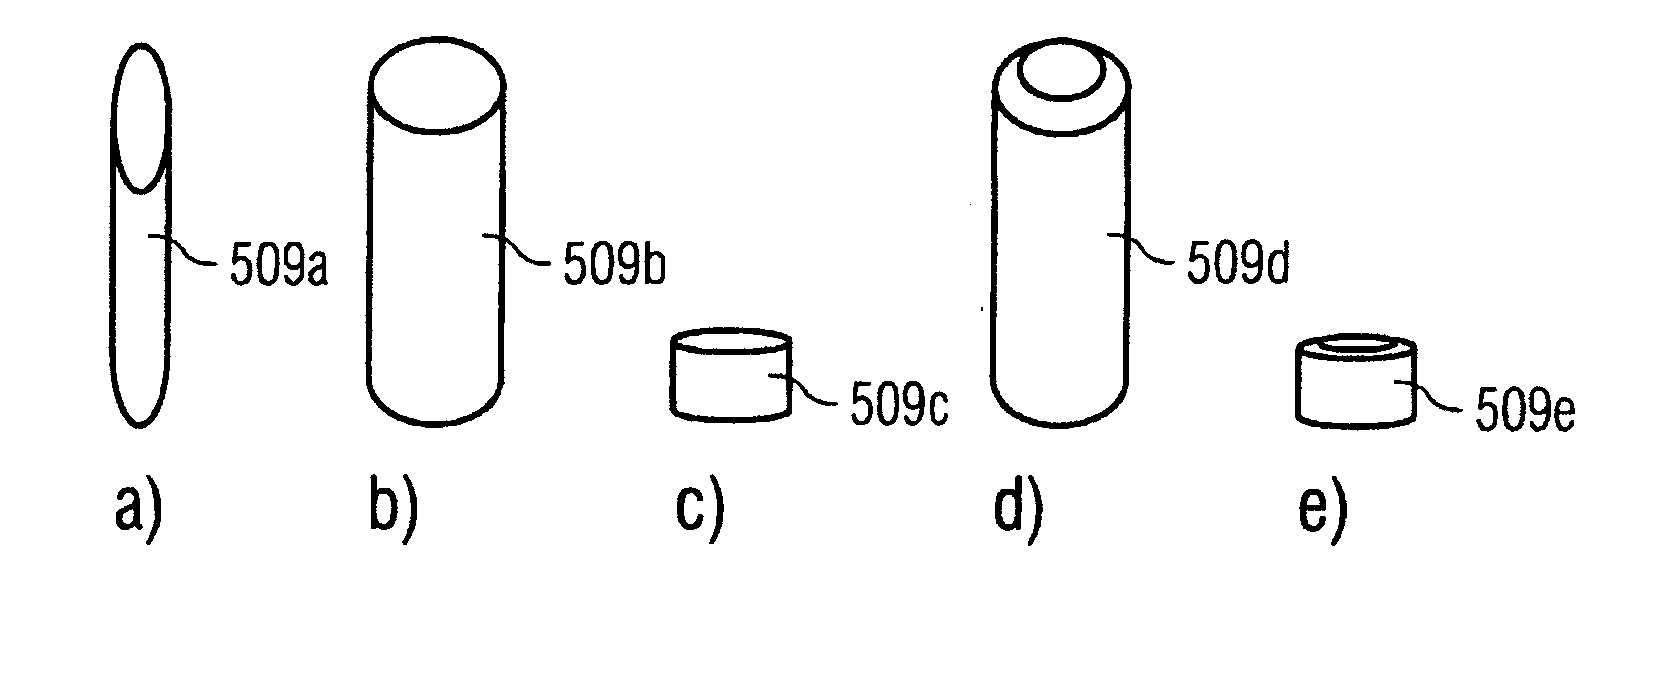 Fibers and methods for use in solid freeform fabrication